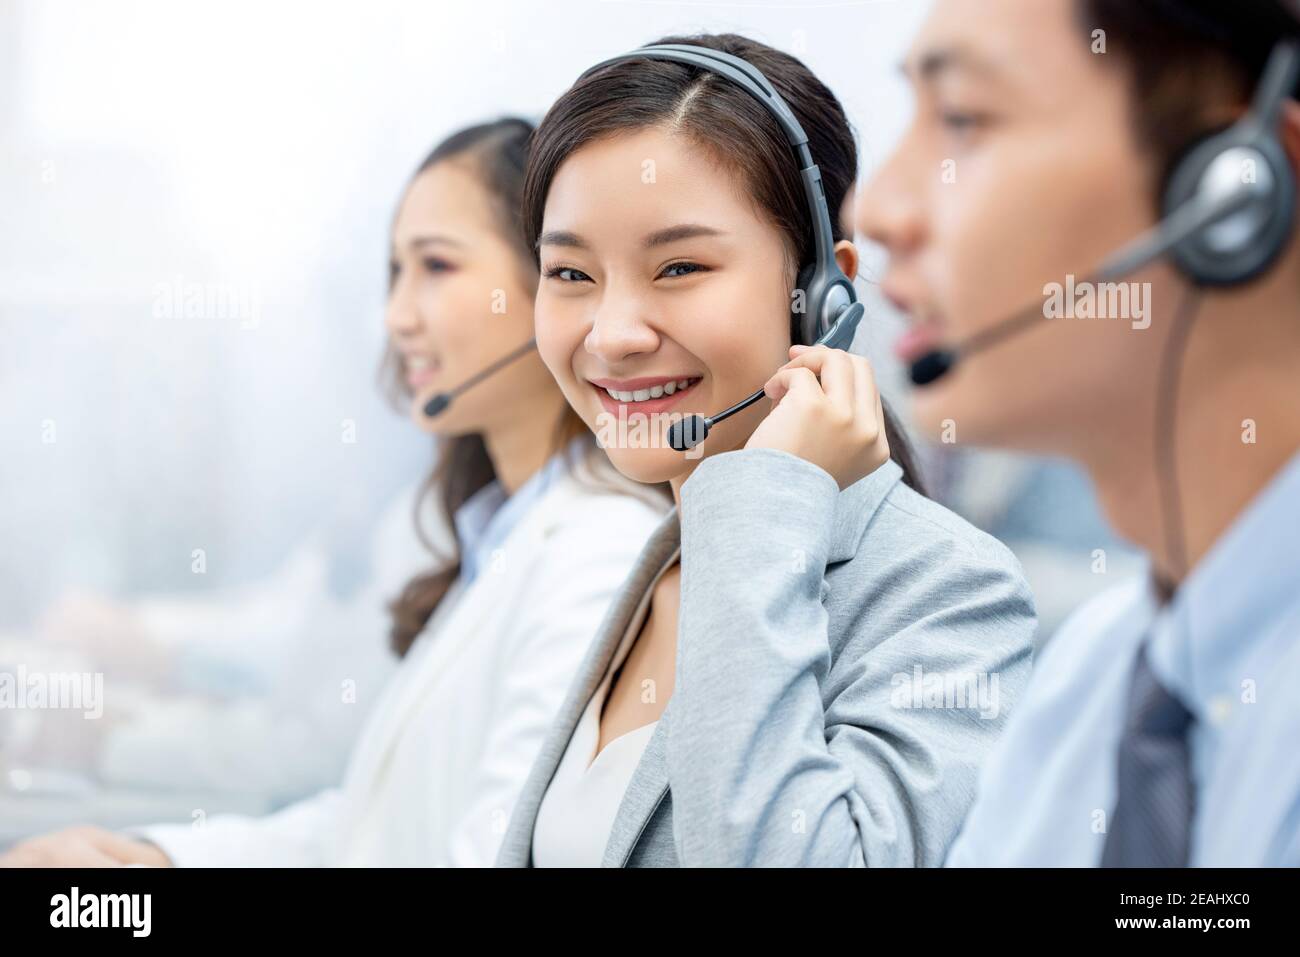 Smiling beautiful Asian woman telemarketing agent working in call center office with team Stock Photo